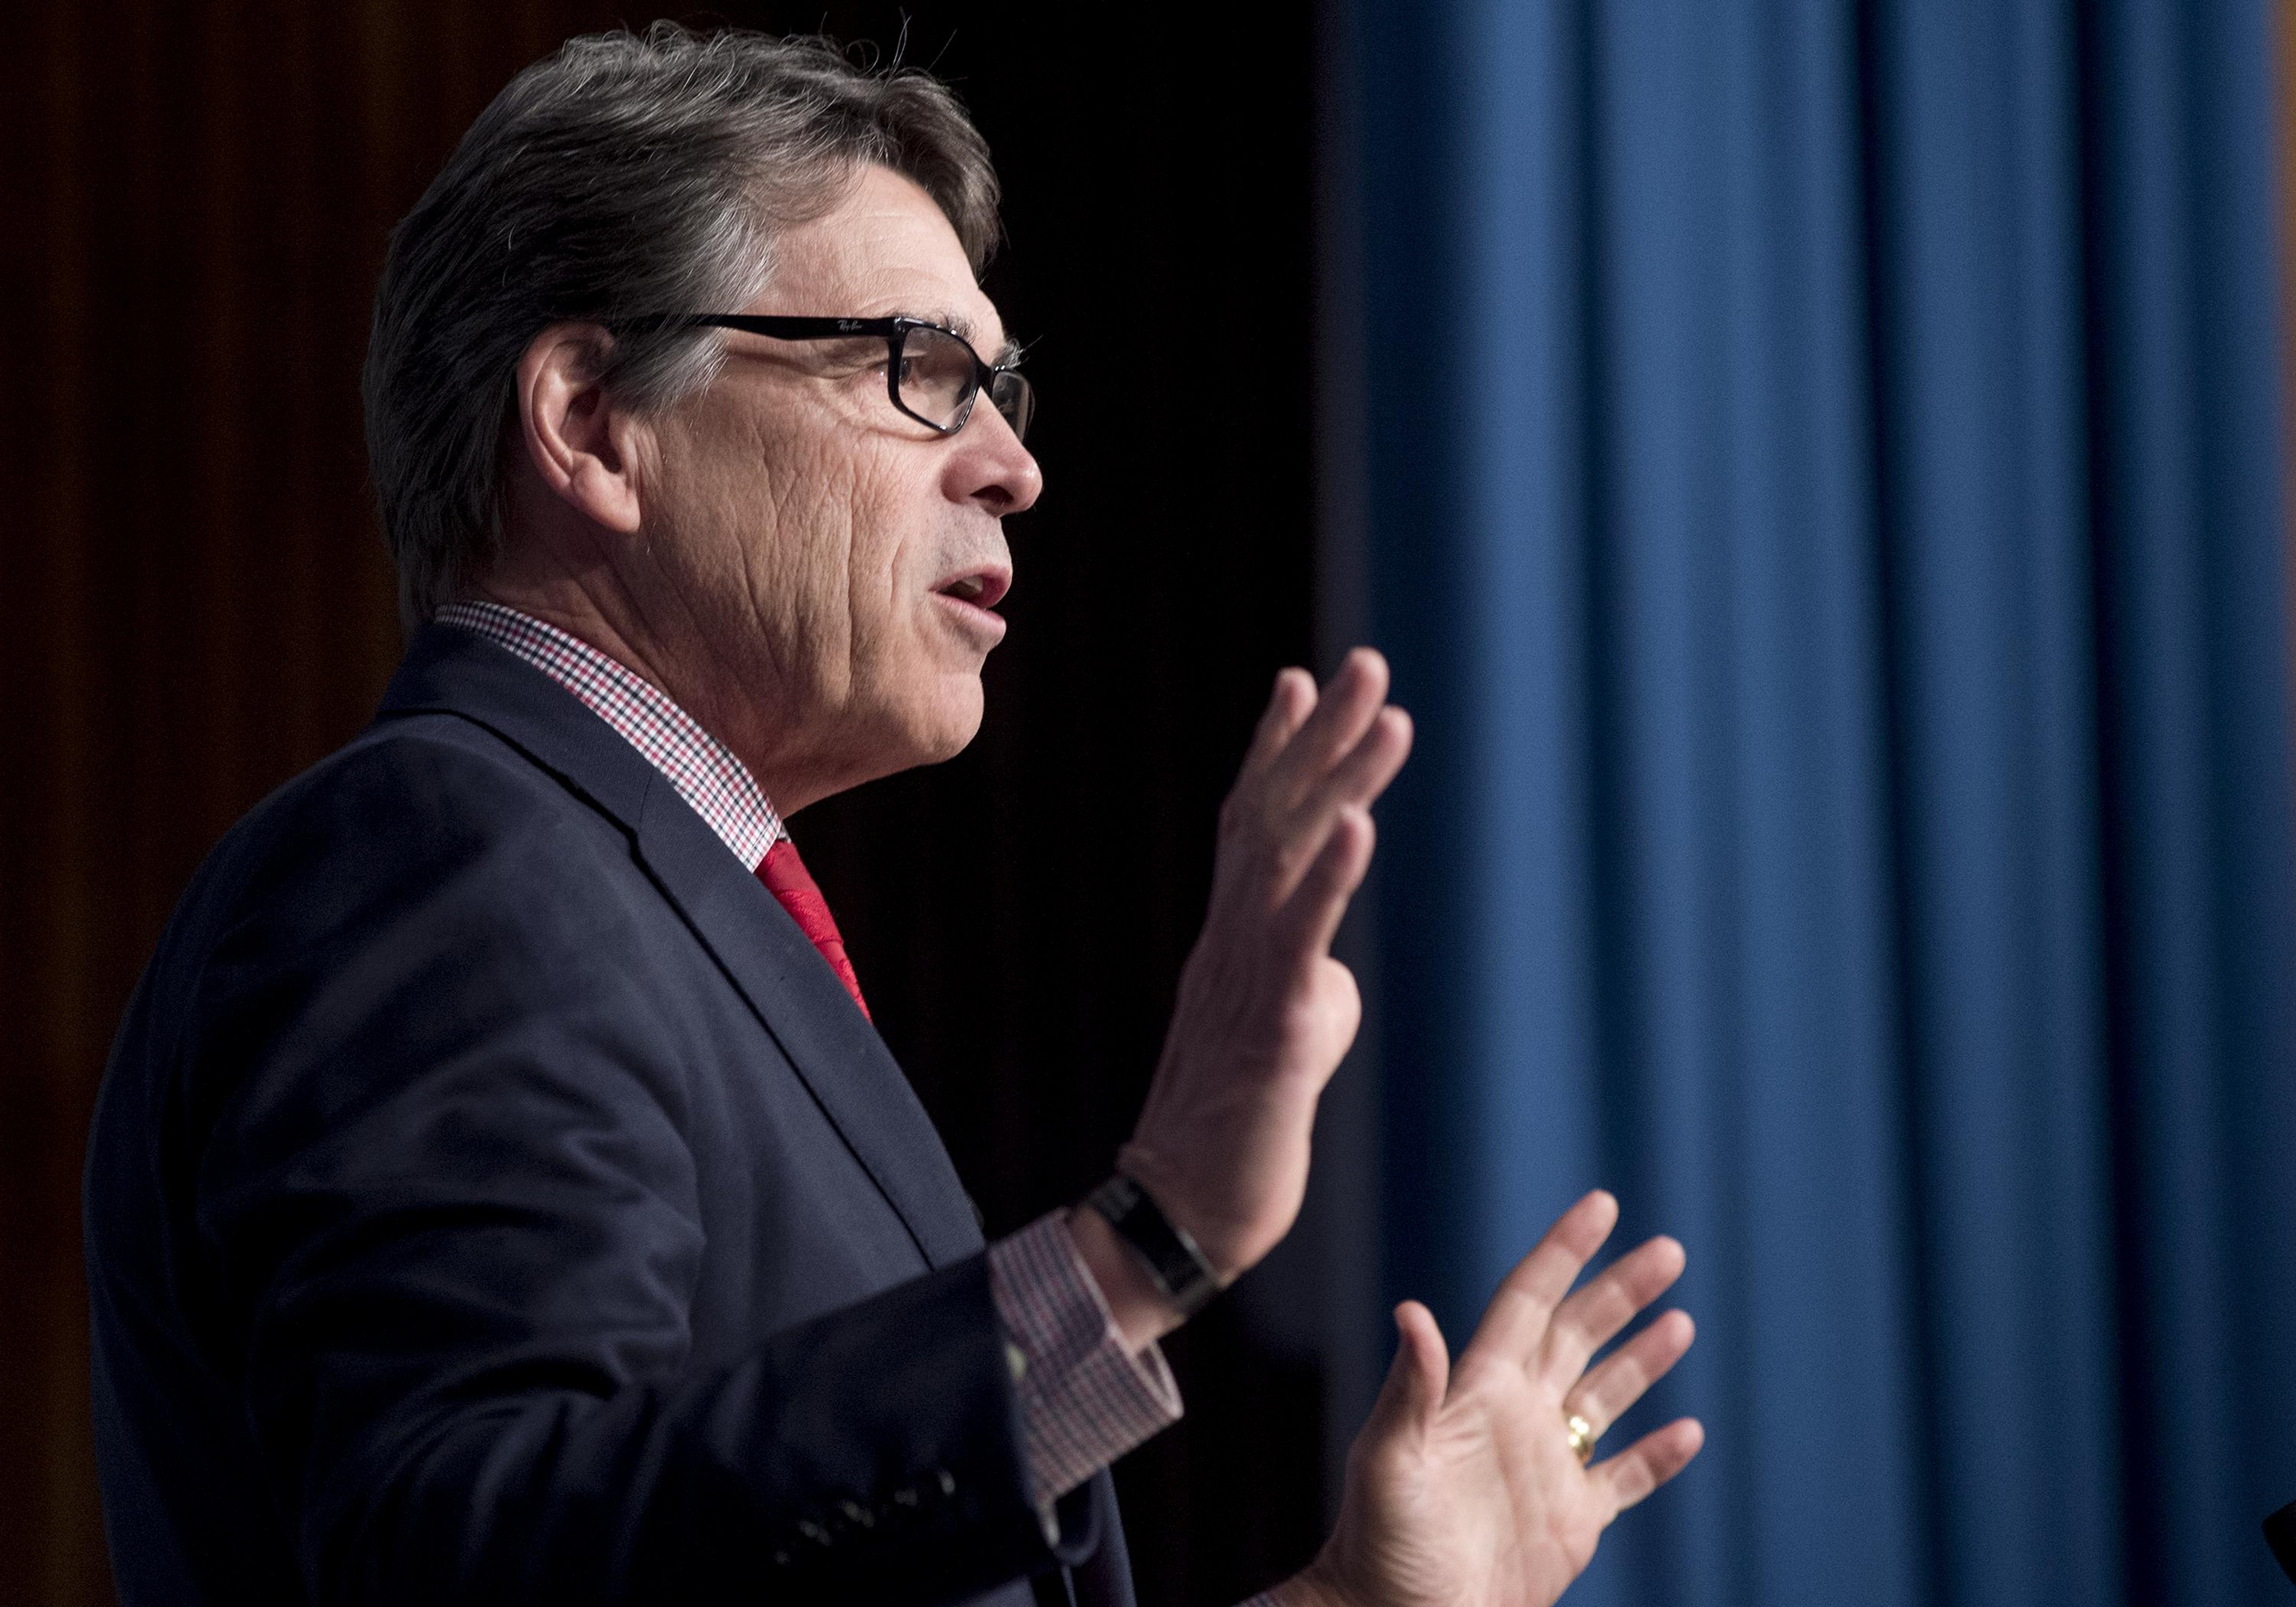 Department of Energy Secretary Rick Perry addresses employees for the first time at Energy Department headquarters in Washington, D.C. on March 3, 2017. (Smith Collection—Gado/Getty Images)